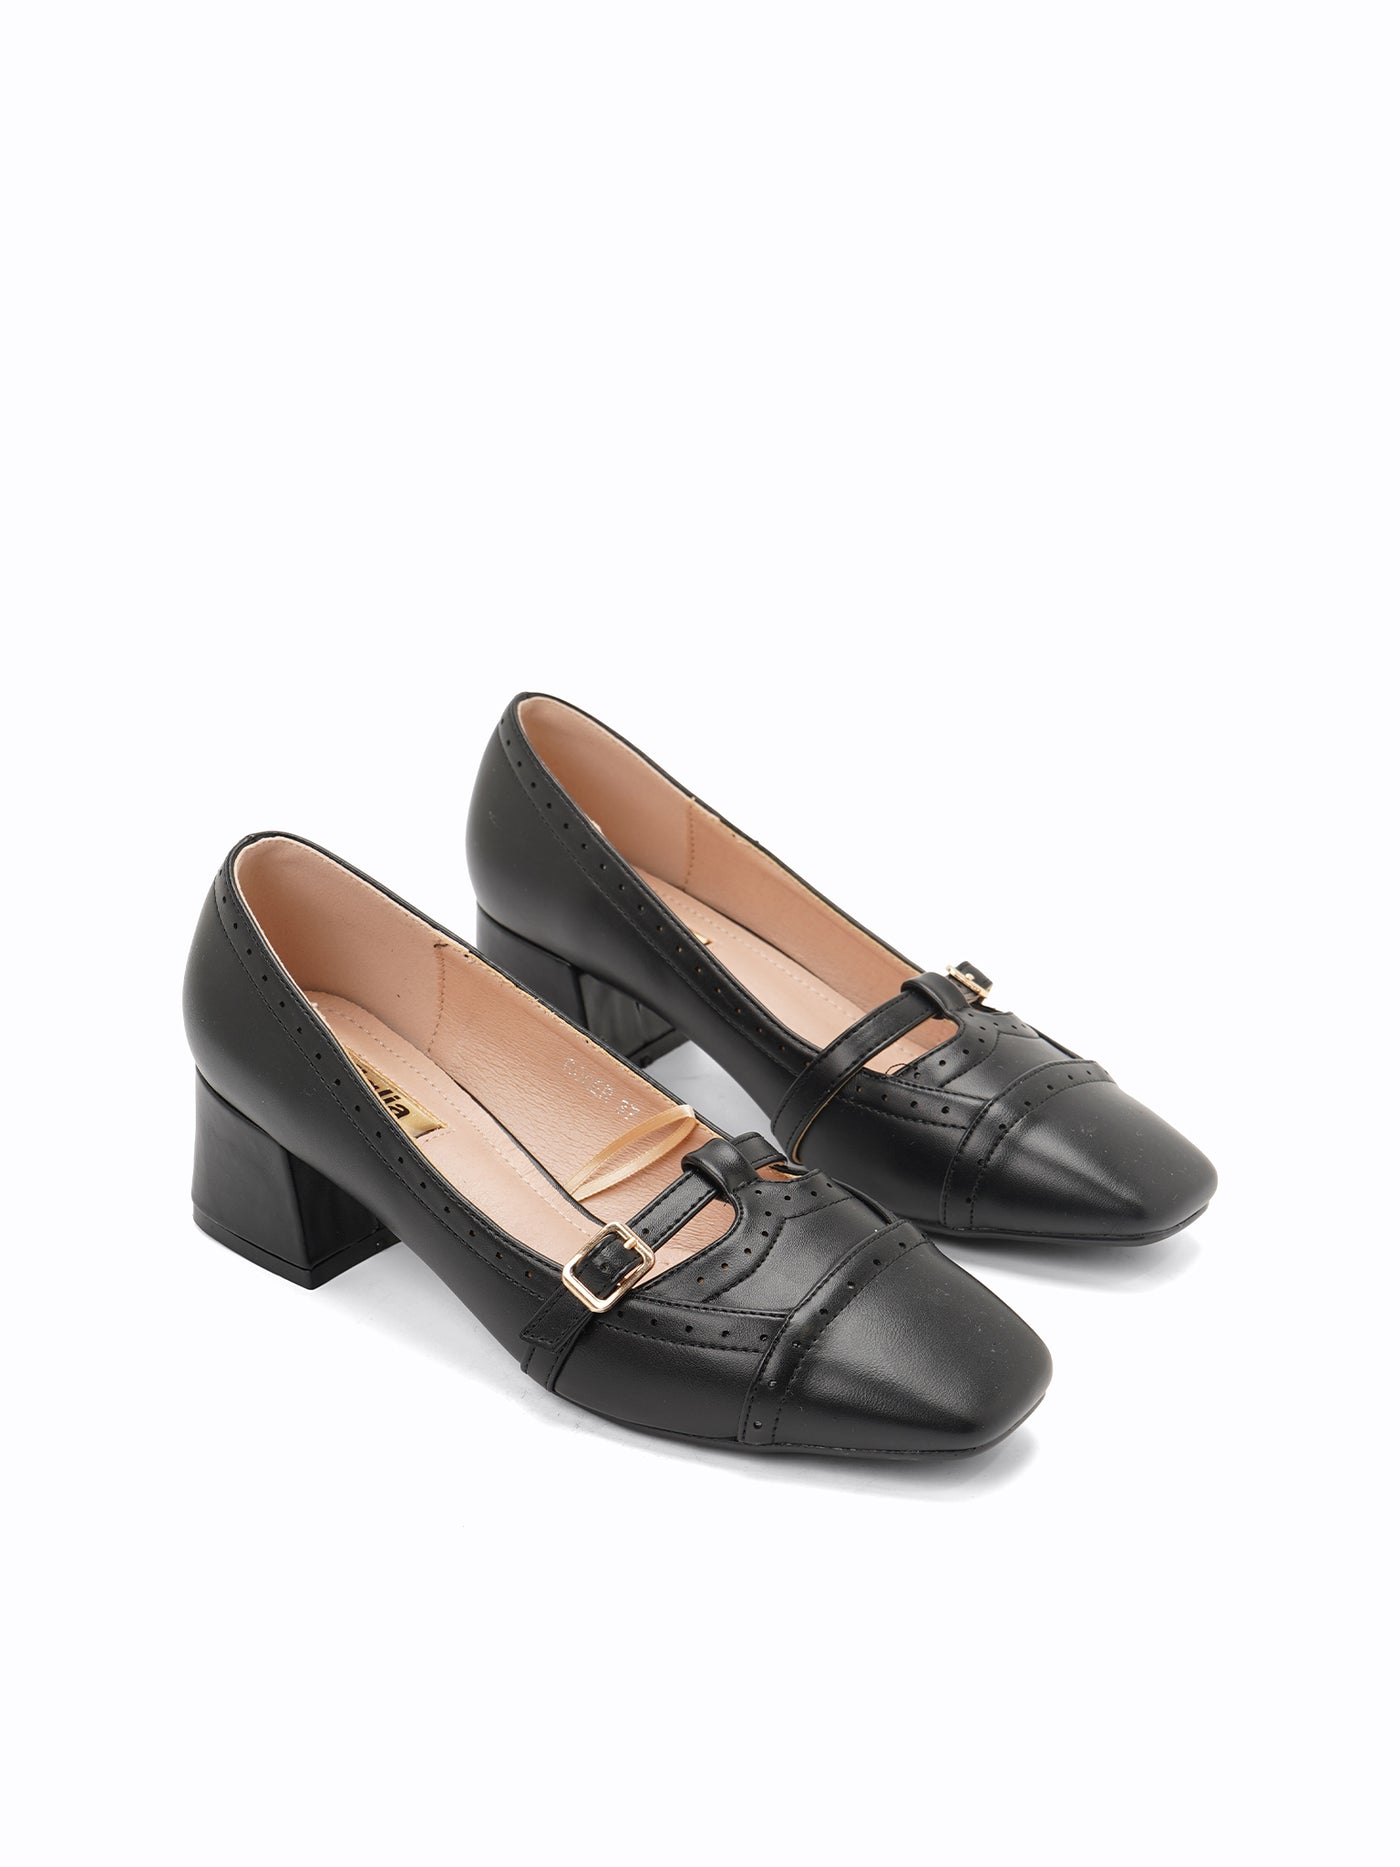 Roger Mary Jane Pumps